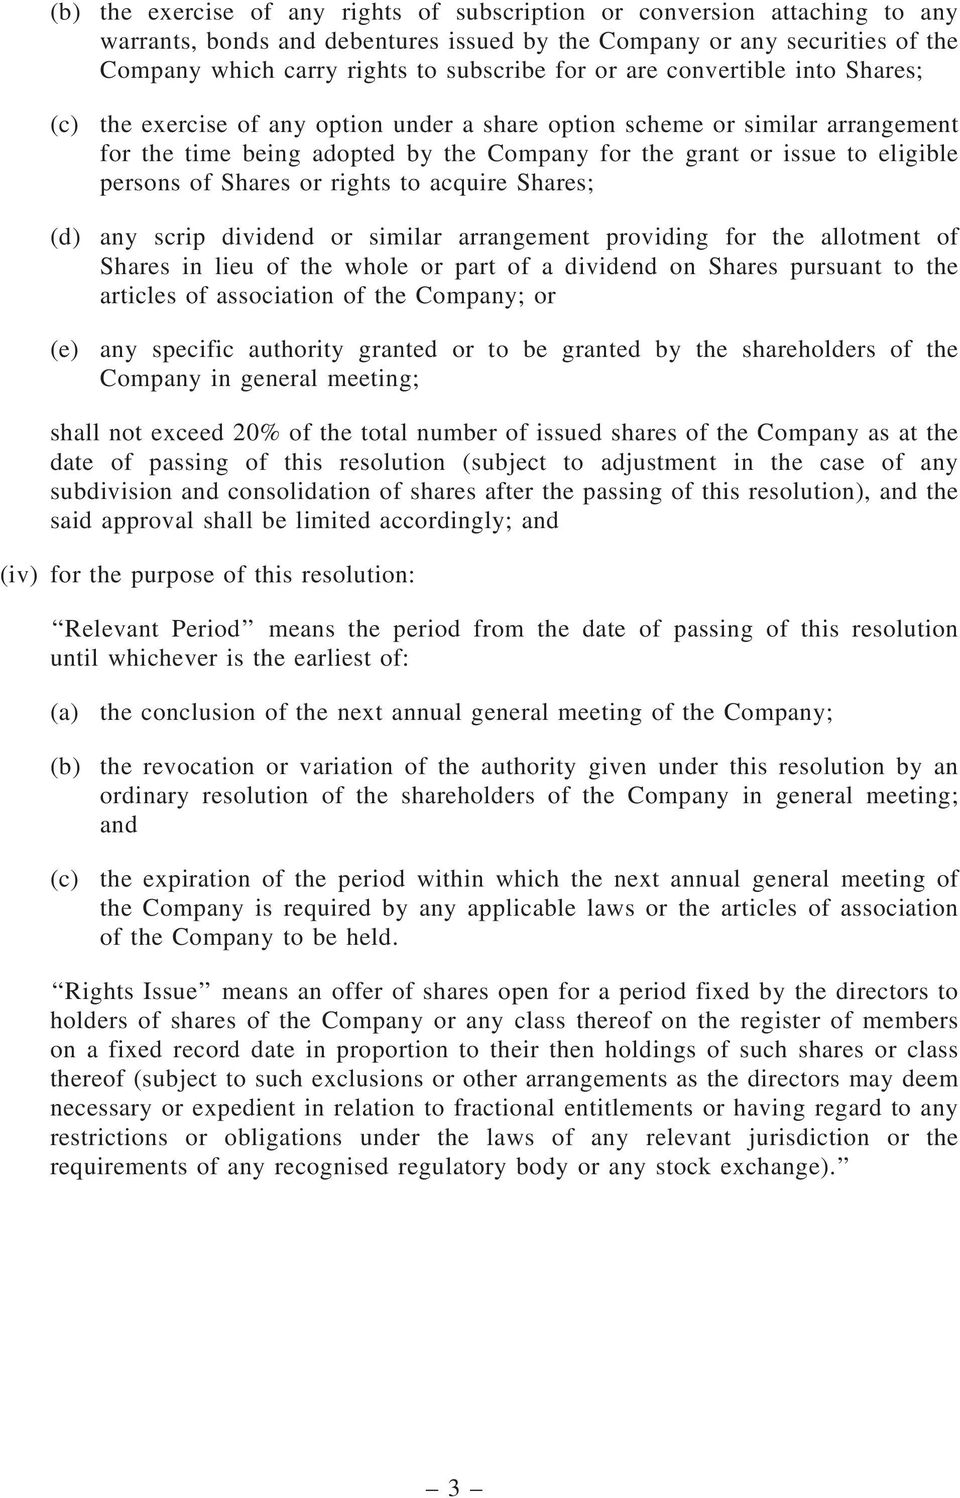 of Shares or rights to acquire Shares; any scrip dividend or similar arrangement providing for the allotment of Shares in lieu of the whole or part of a dividend on Shares pursuant to the articles of